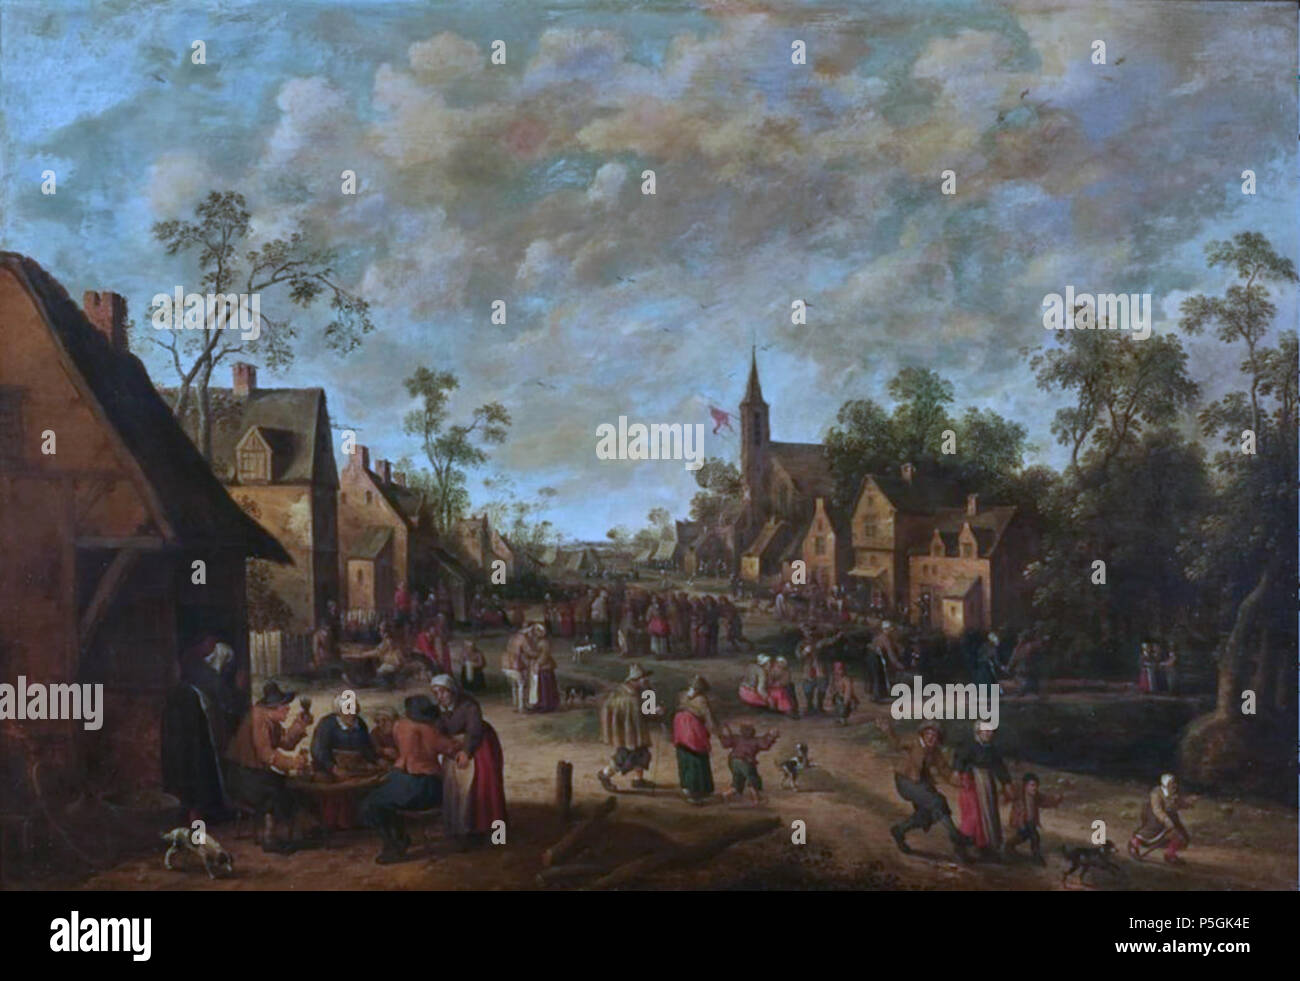 N/A. English: Oil on panel genre painting of peasants feasting in a village by Joost Cornelisz Droochsloot . Joost Cornelisz Droochsloot 480 Peasants feasting in a village by Joost Cornelisz Droochsloot Stock Photo